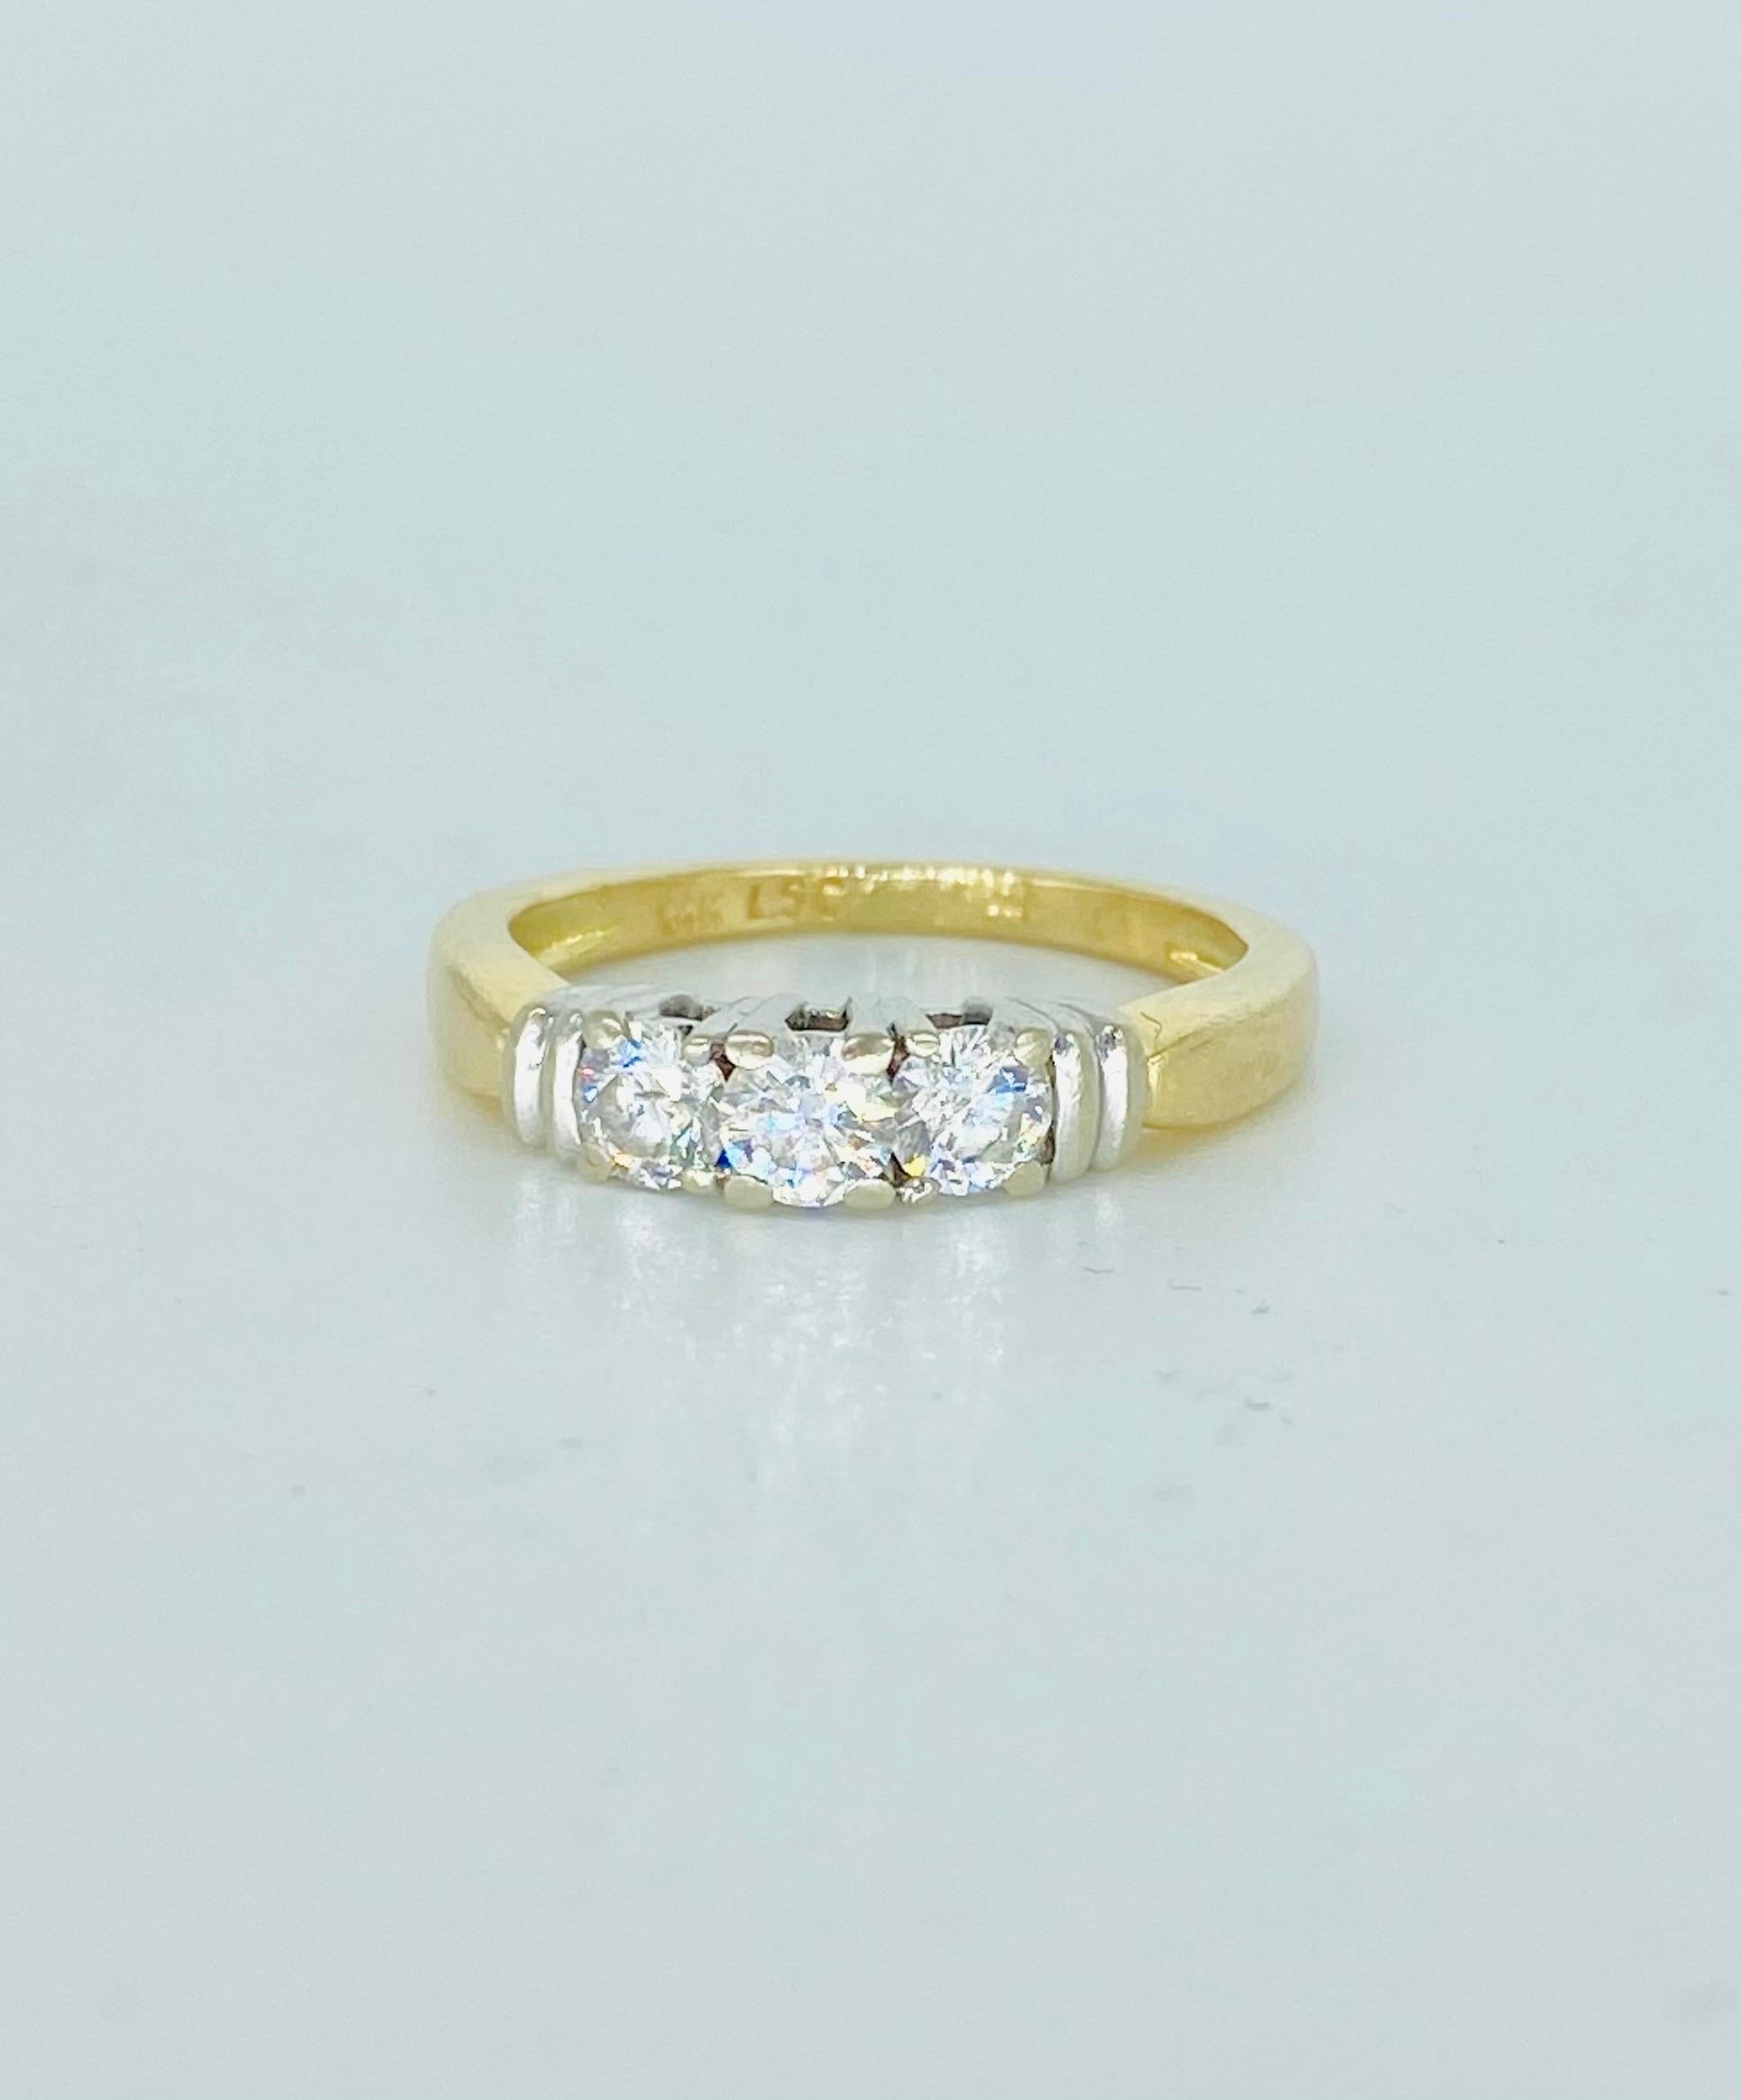 Vintage Three-Stone 0.60 Carat Diamond Ring 14k Gold In Excellent Condition For Sale In Miami, FL